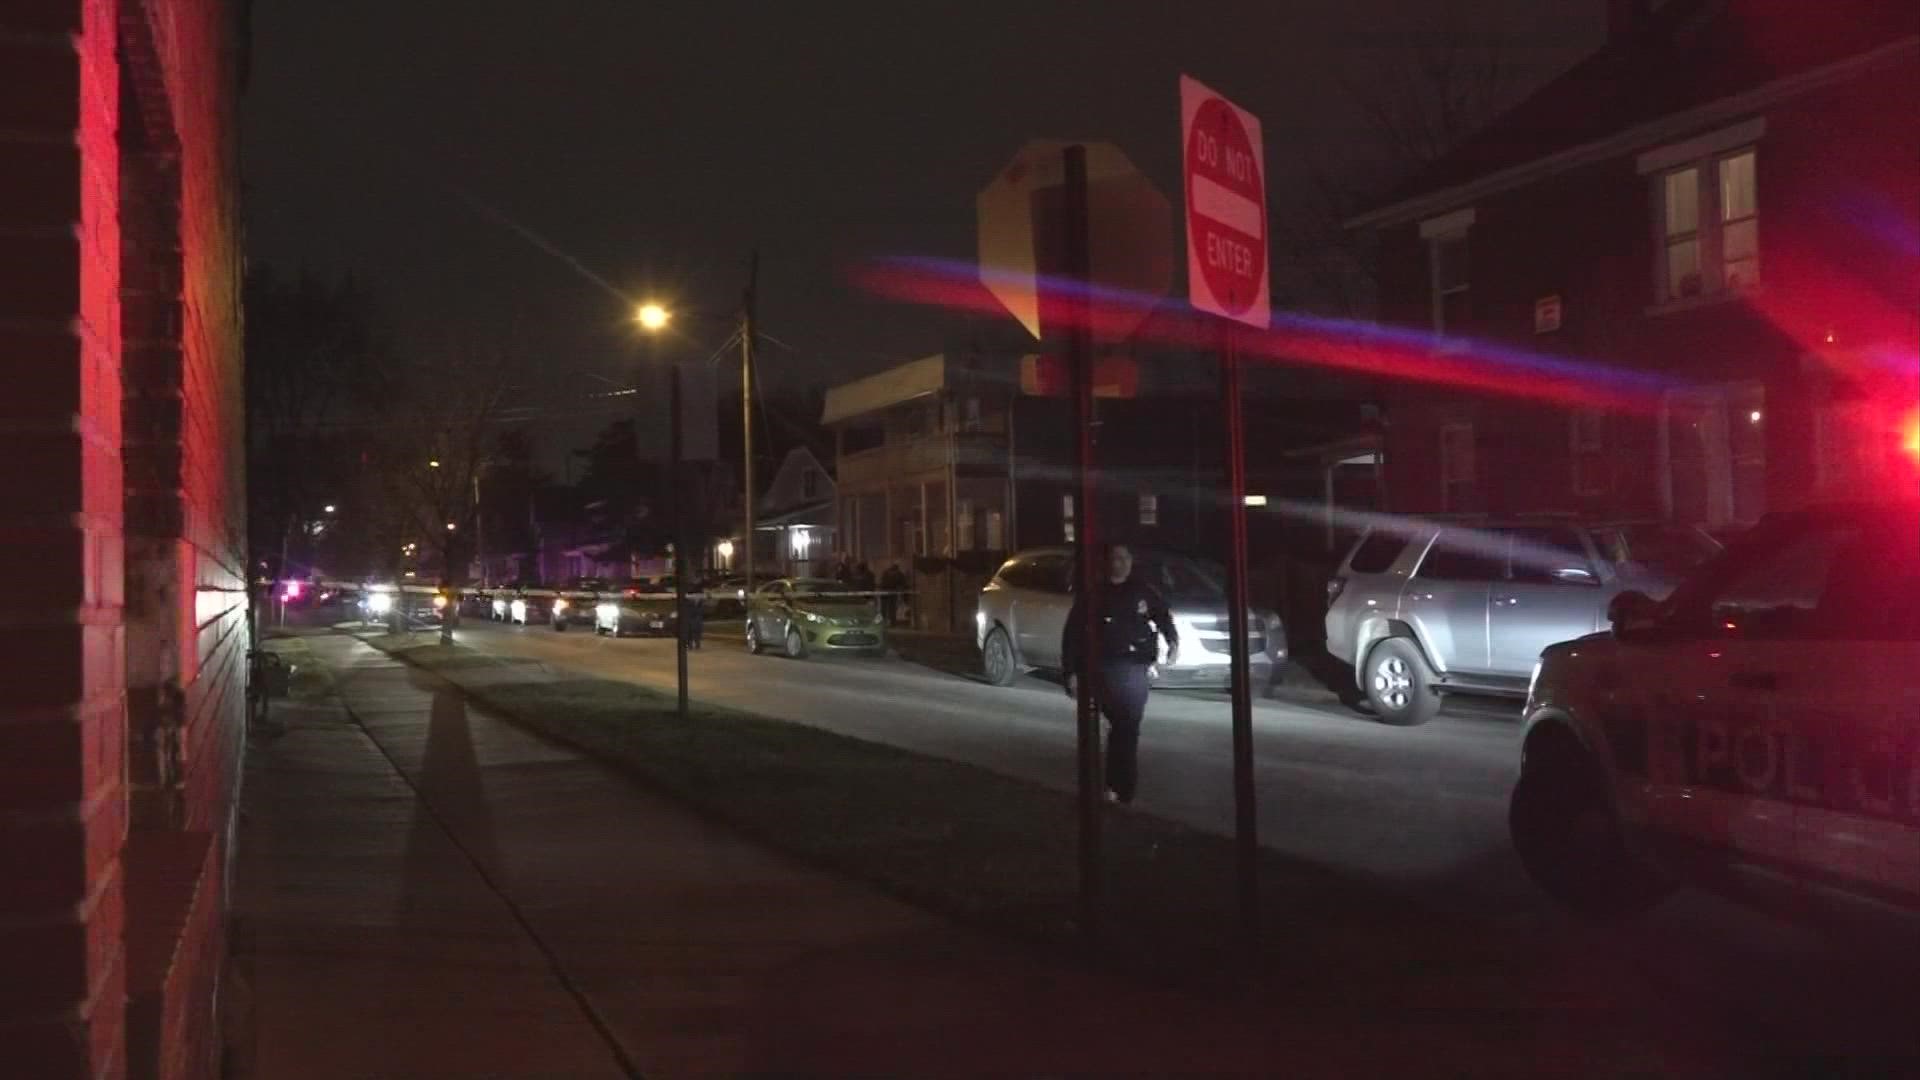 A 28-year-old man was injured after Columbus police say he was shot early Monday morning in an alley while attending his sister’s birthday party.